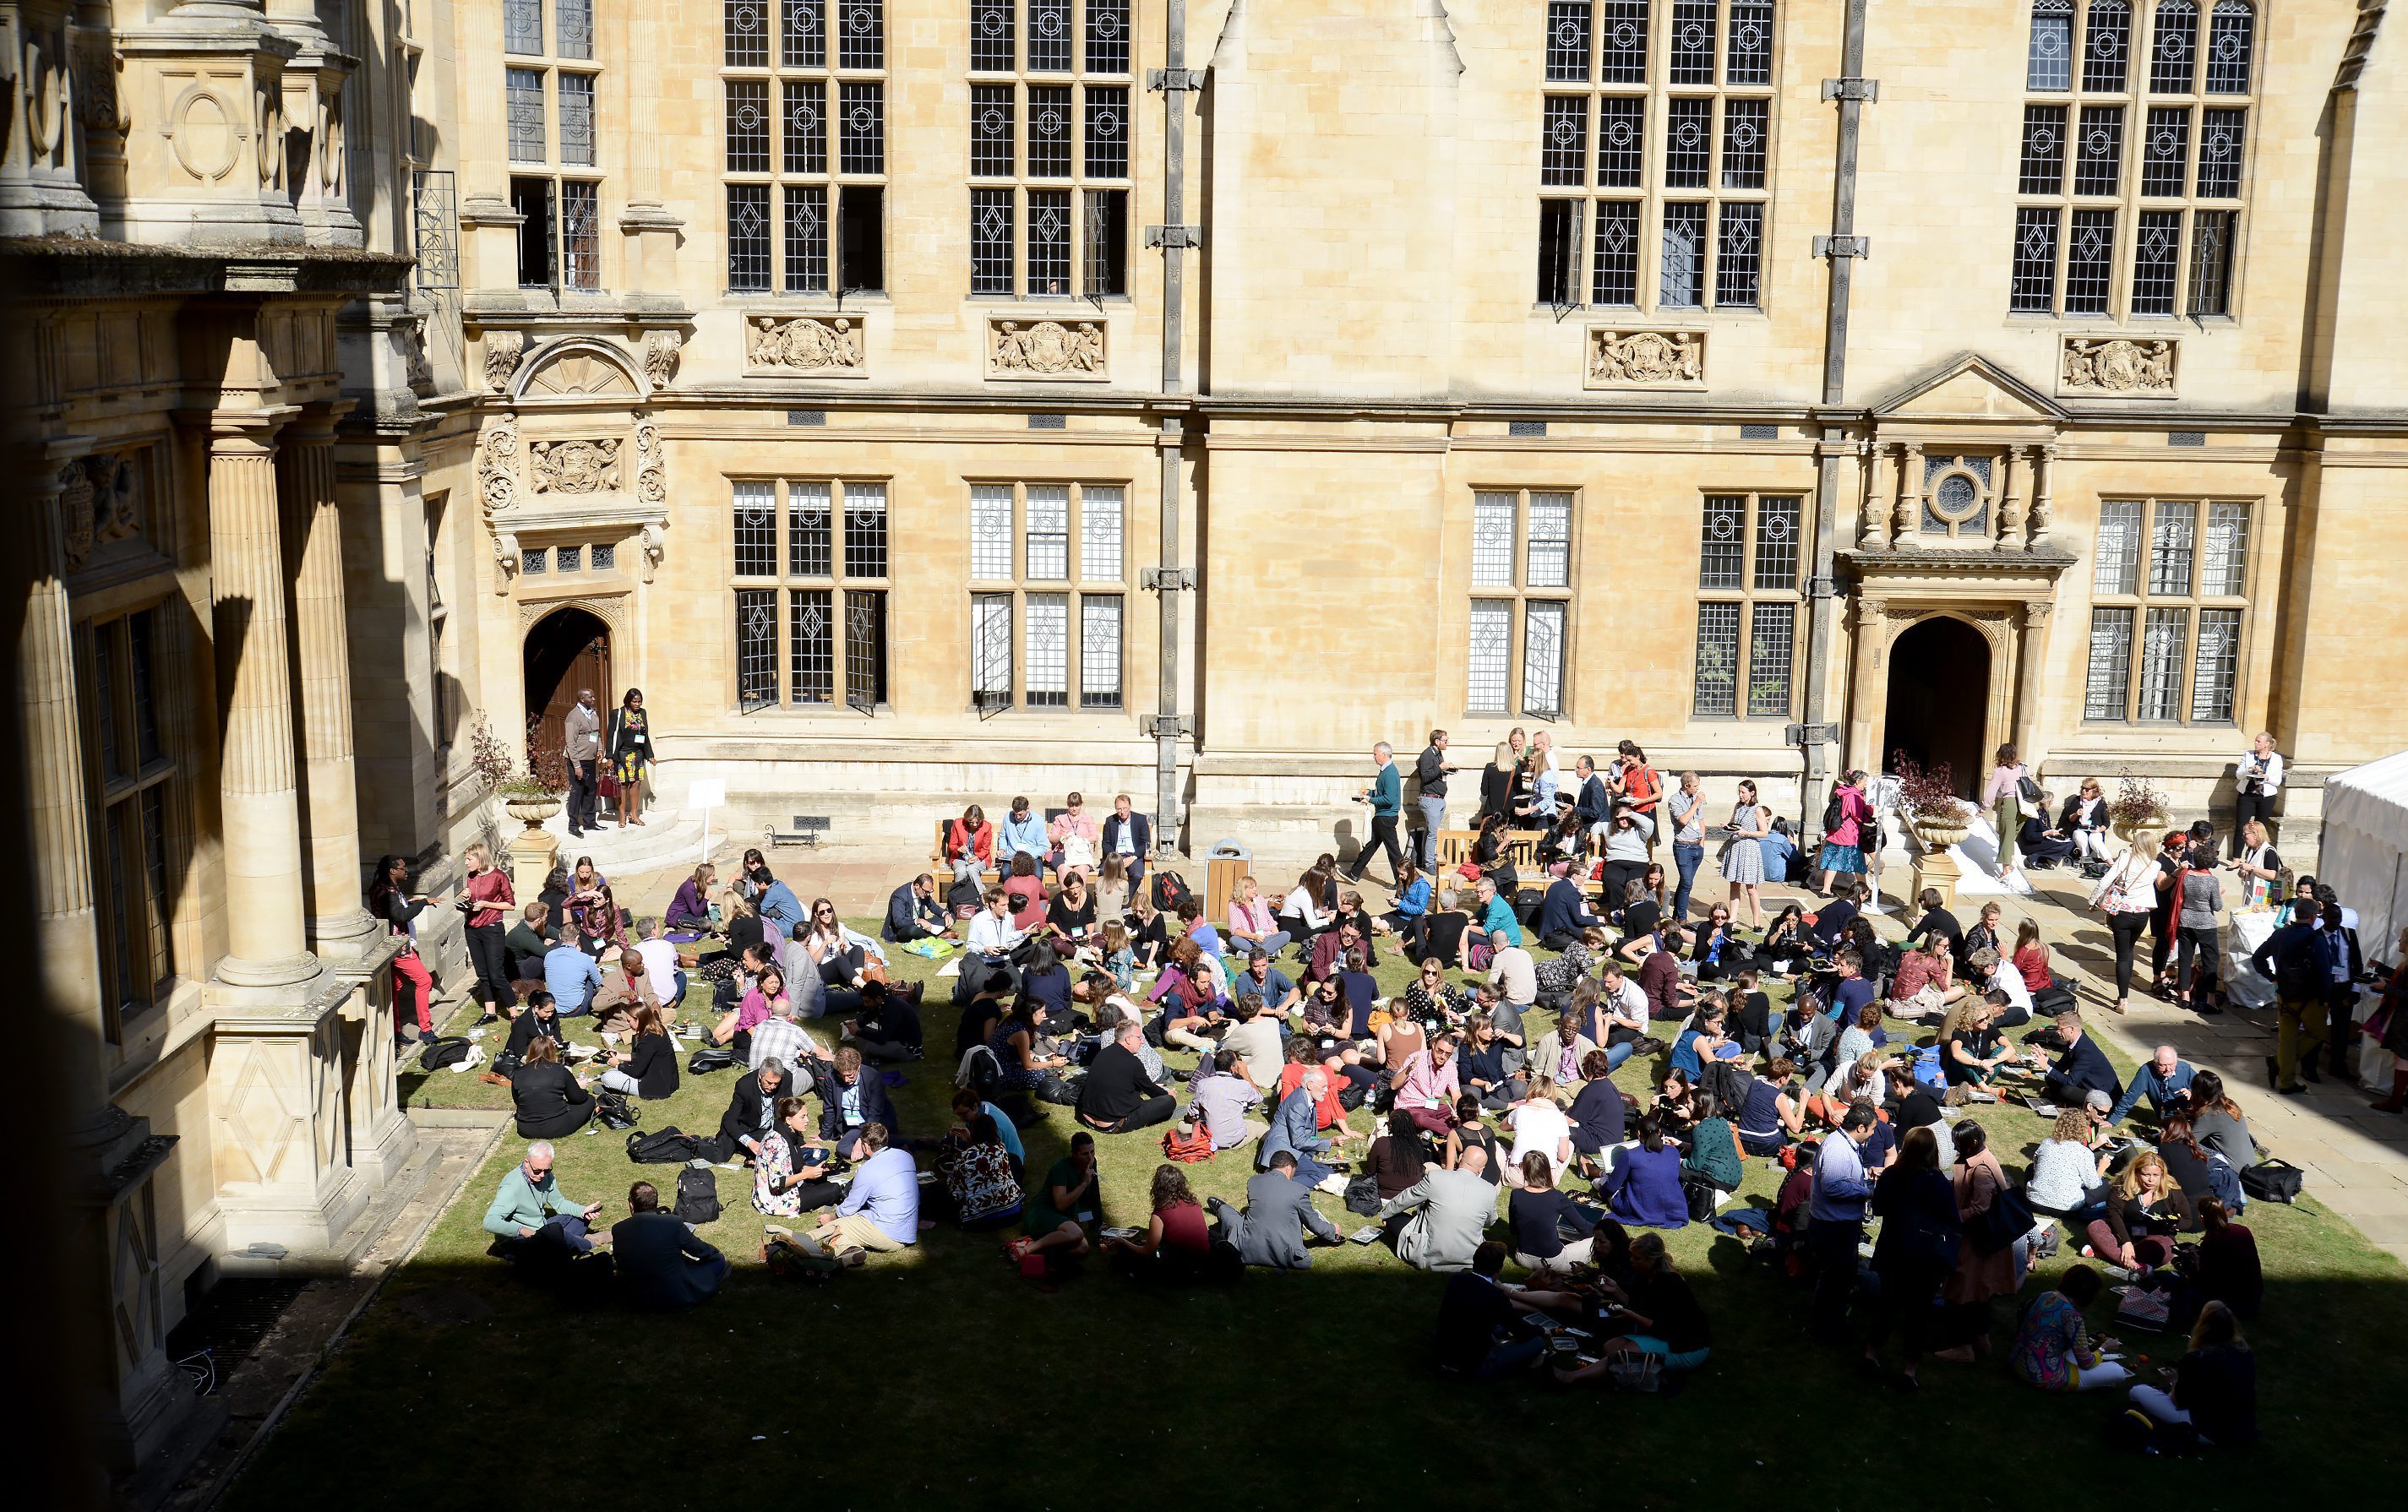 Conference delegates enjoying the sun in the Exam School Quad at lunchtime